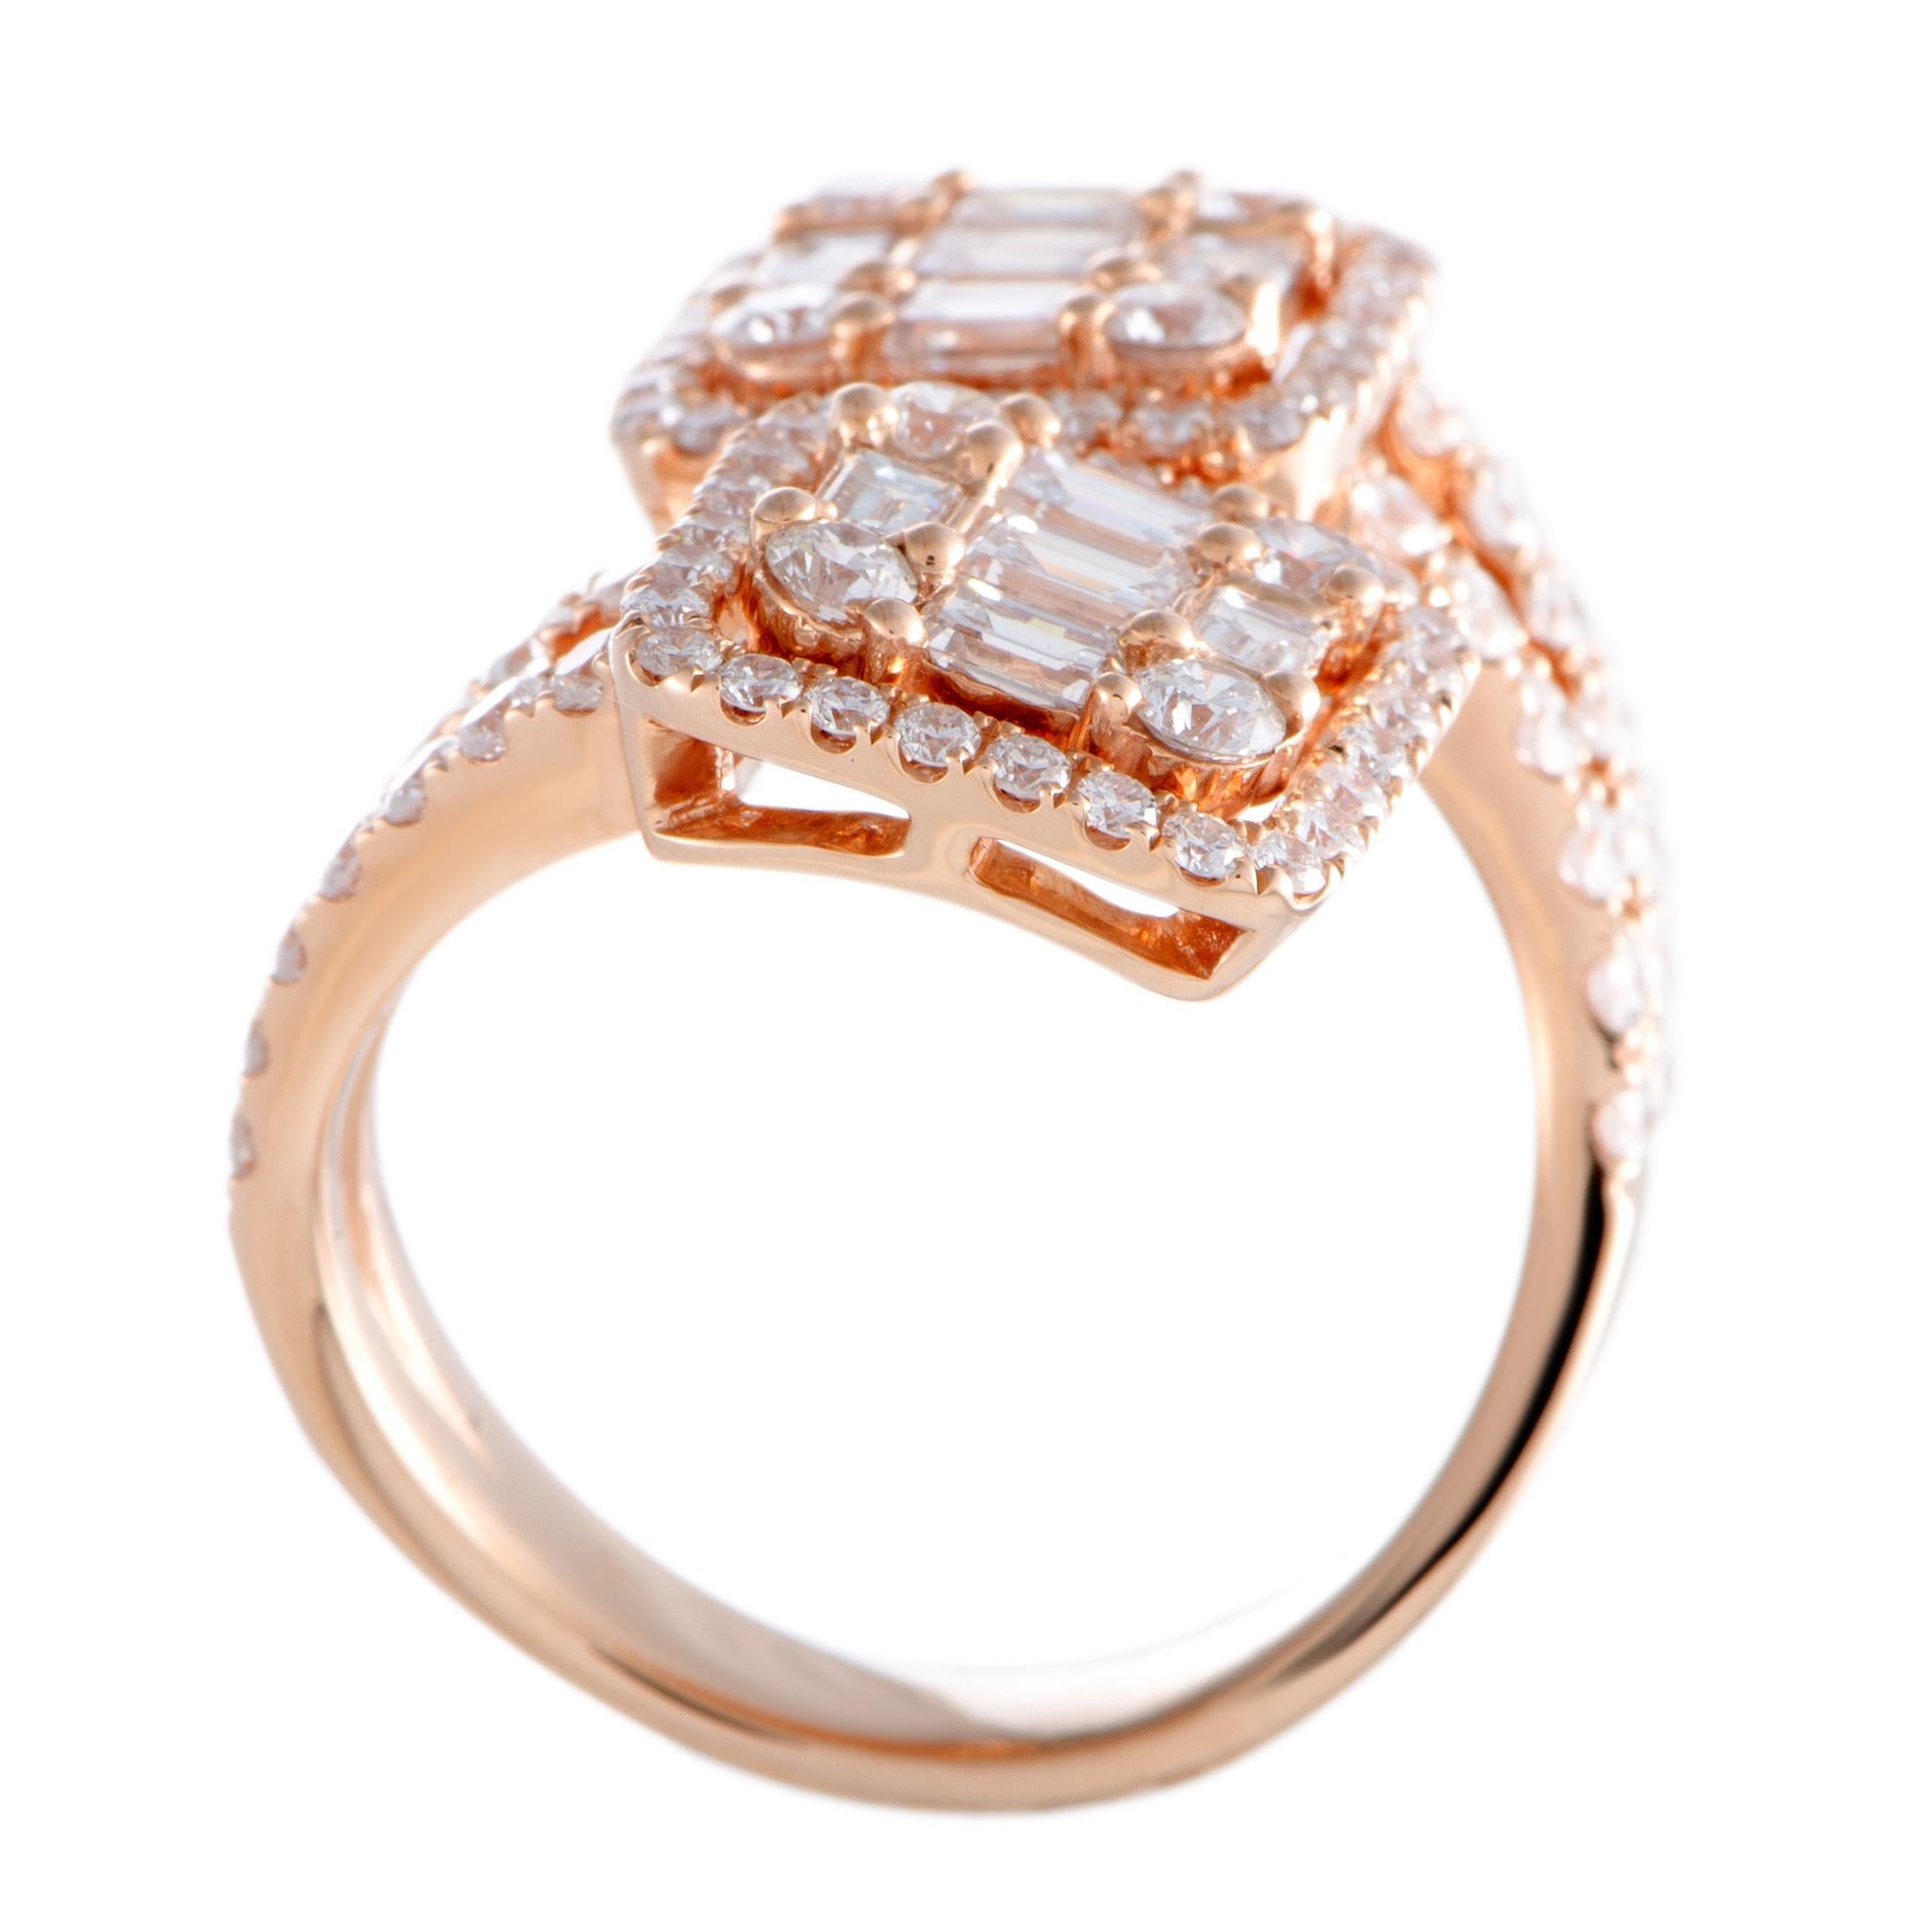 With its elegant design and glamorous diamond décor, this magnificent jewelry piece will elevate your style in a most extravagant fashion. Presented by , the ring is masterfully crafted from enchantingly radiant 18K rose gold and it weighs 8.7